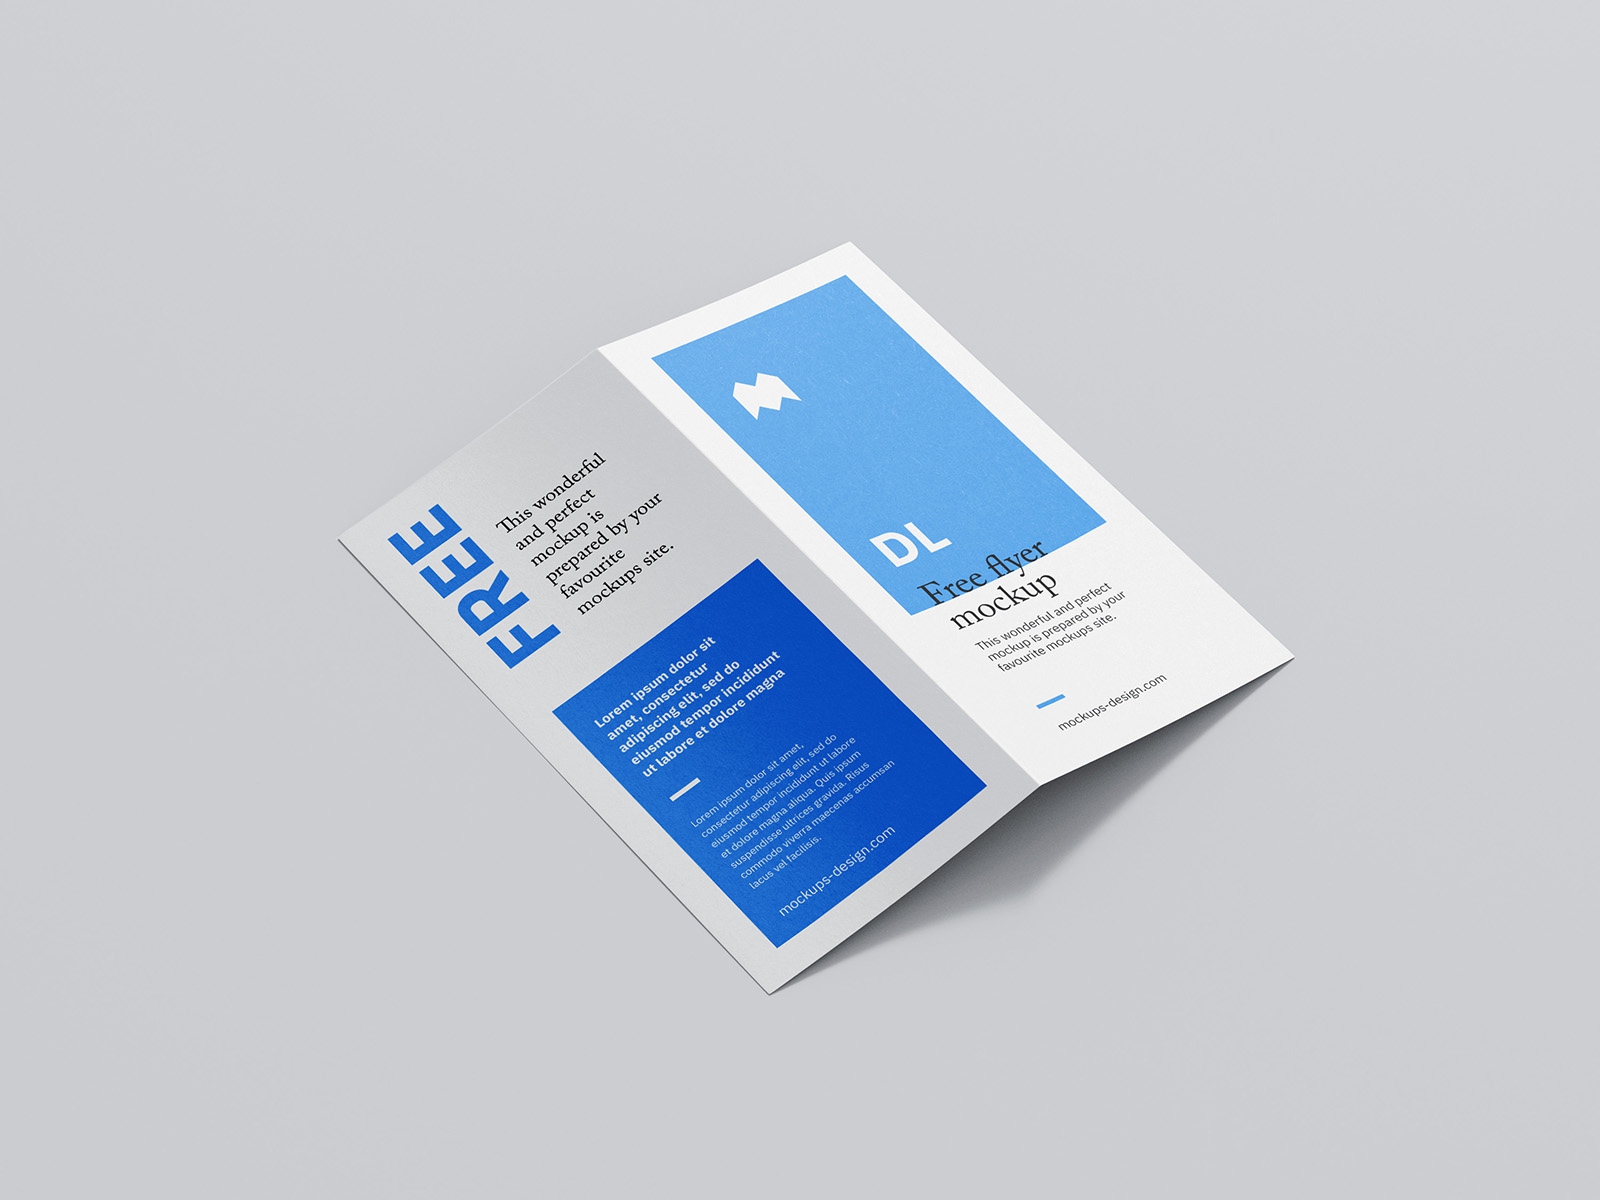 Perspective and Top View of 6 DL Bi-Fold Flyer Mockups FREE PSD